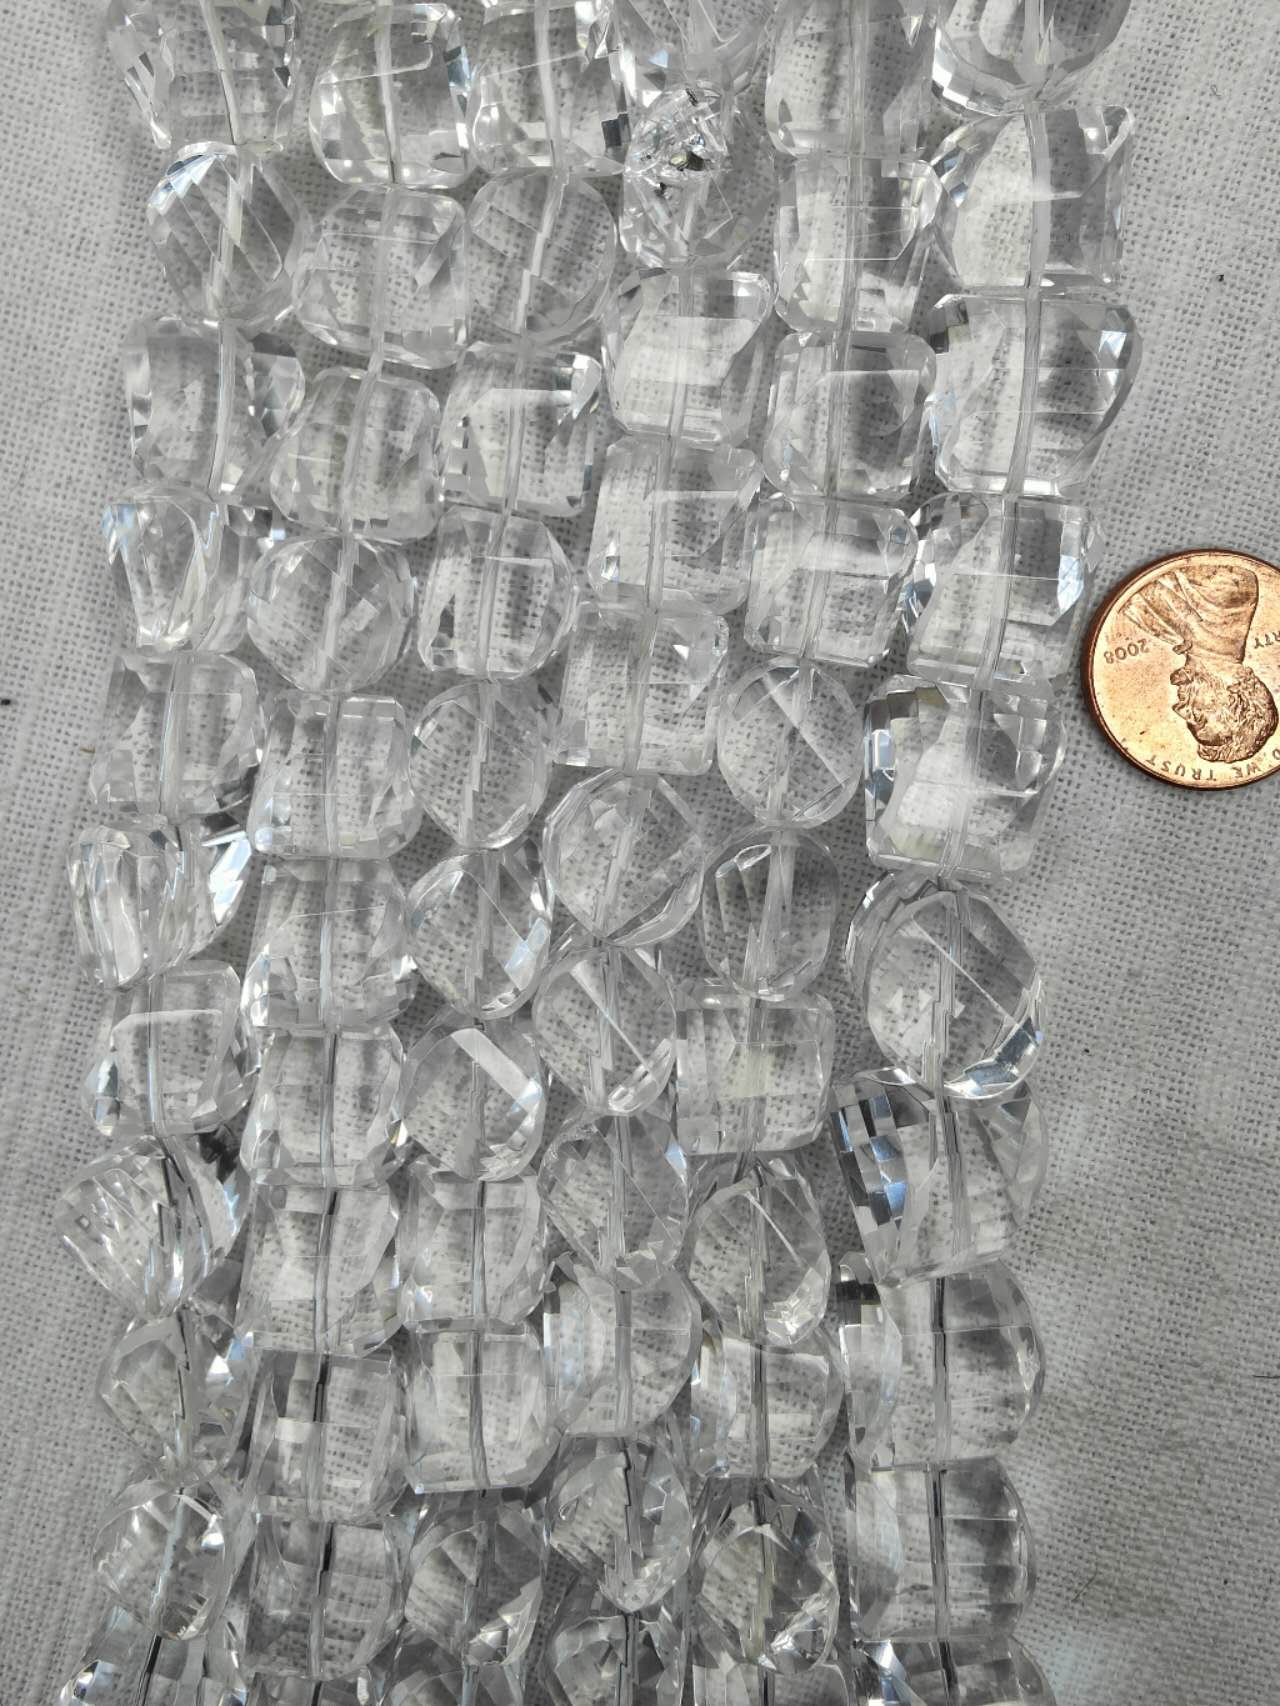 natural super clear quartz 12mm twisted drum shape faceted diamond cut AAA grade 15.5"strand